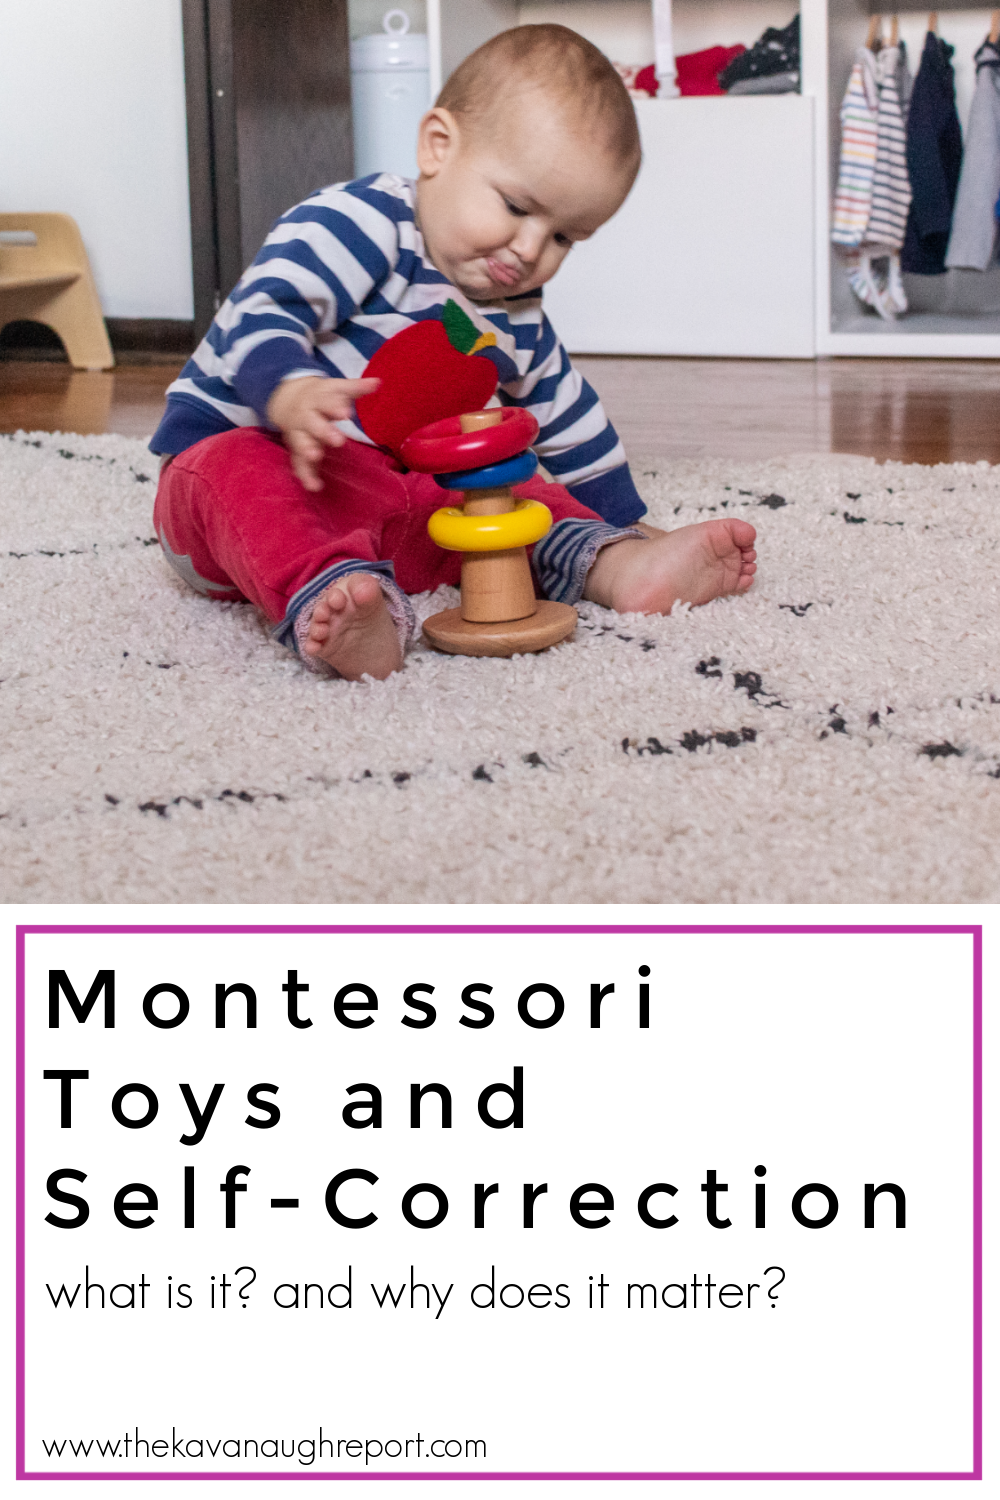 One important quality of Montessori toys is that they are self-correcting. Here is some information about why self-correcting materials are important.